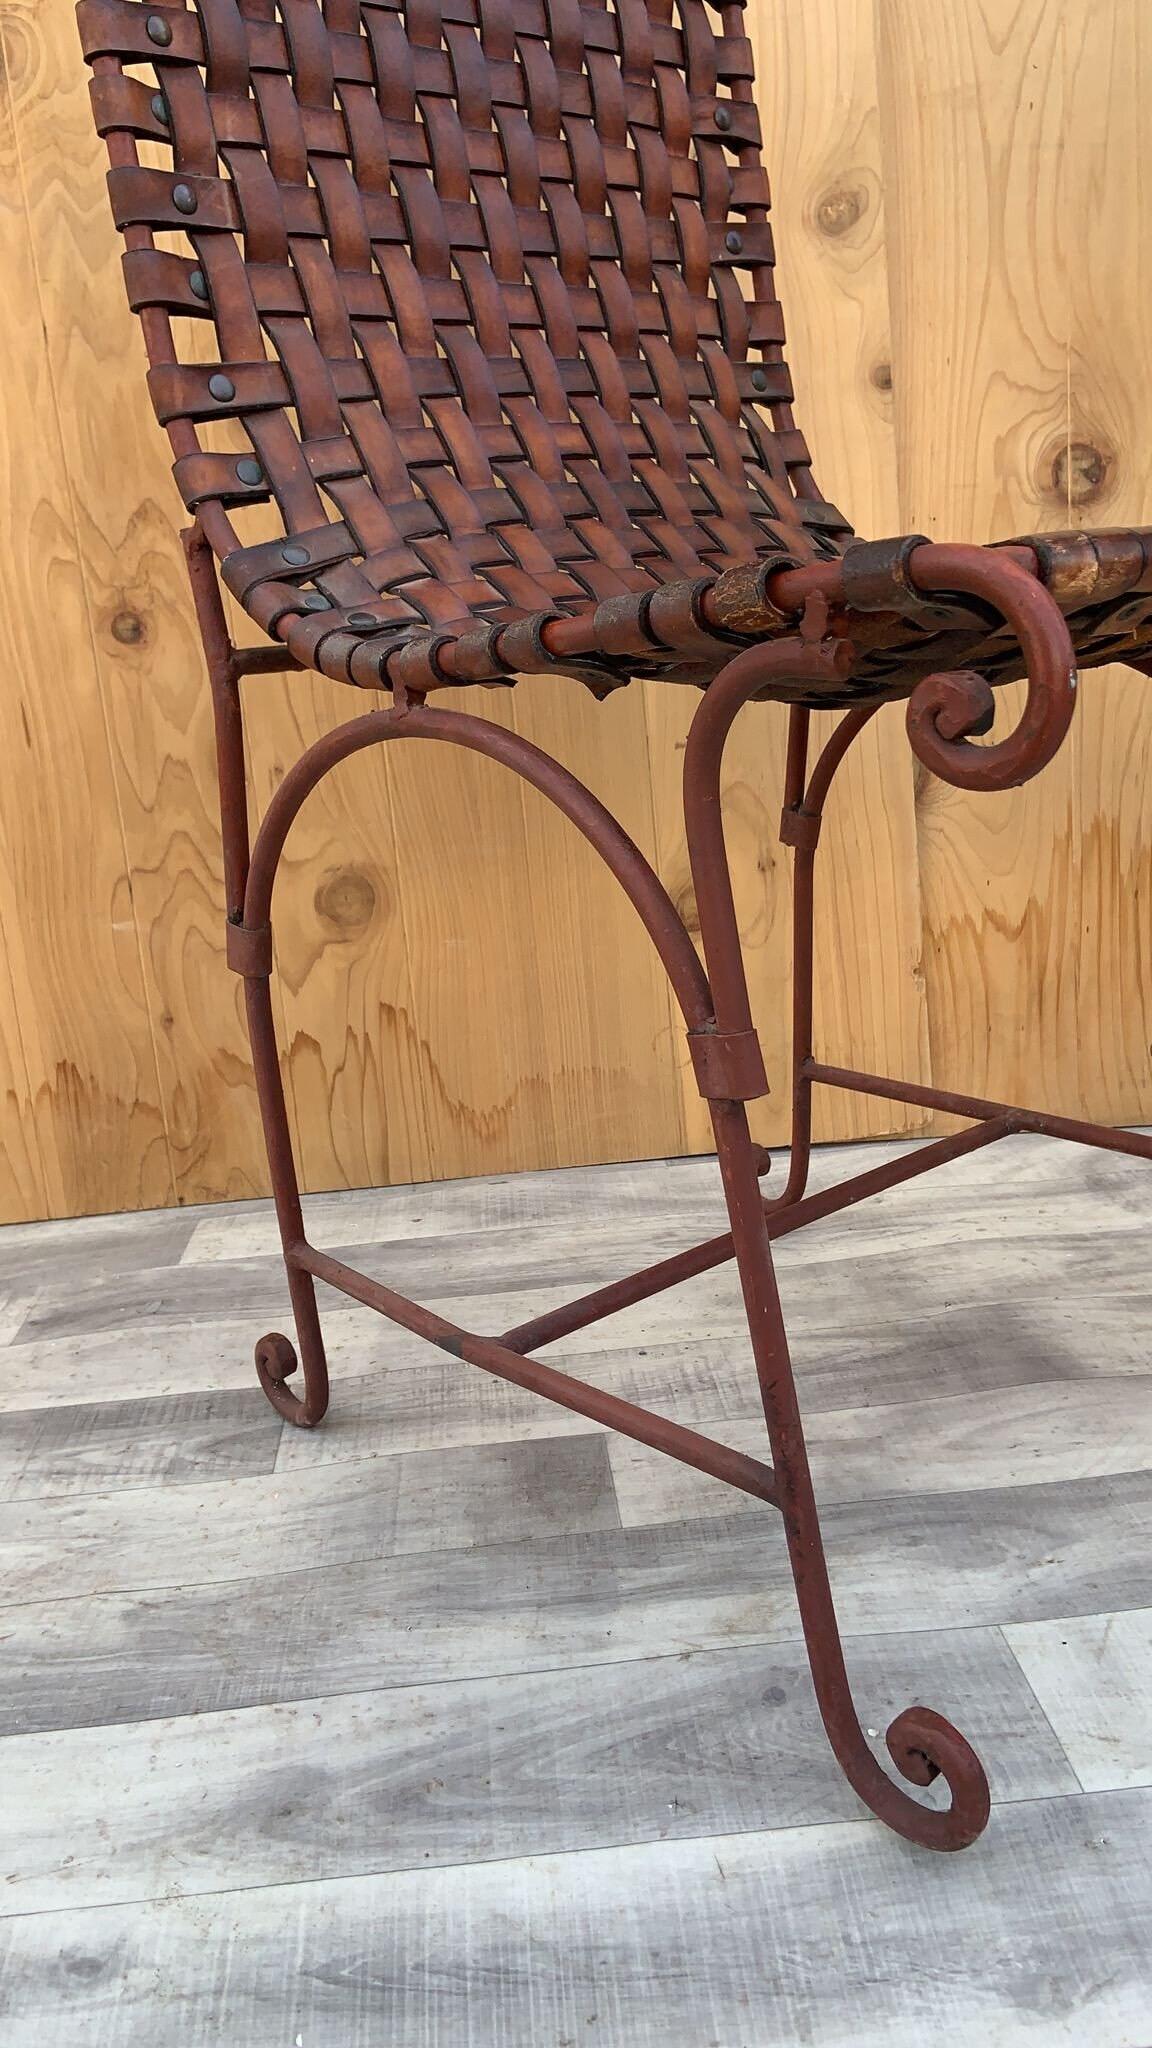 Vintage Italian Hand Forged wrought iron Woven Leather Side Chairs - Pair

Gorgeous vintage hand forged wrought iron scrolled base with hand woven Italian full grain leather. These side scrolled chairs are in exceptional quality and would be a